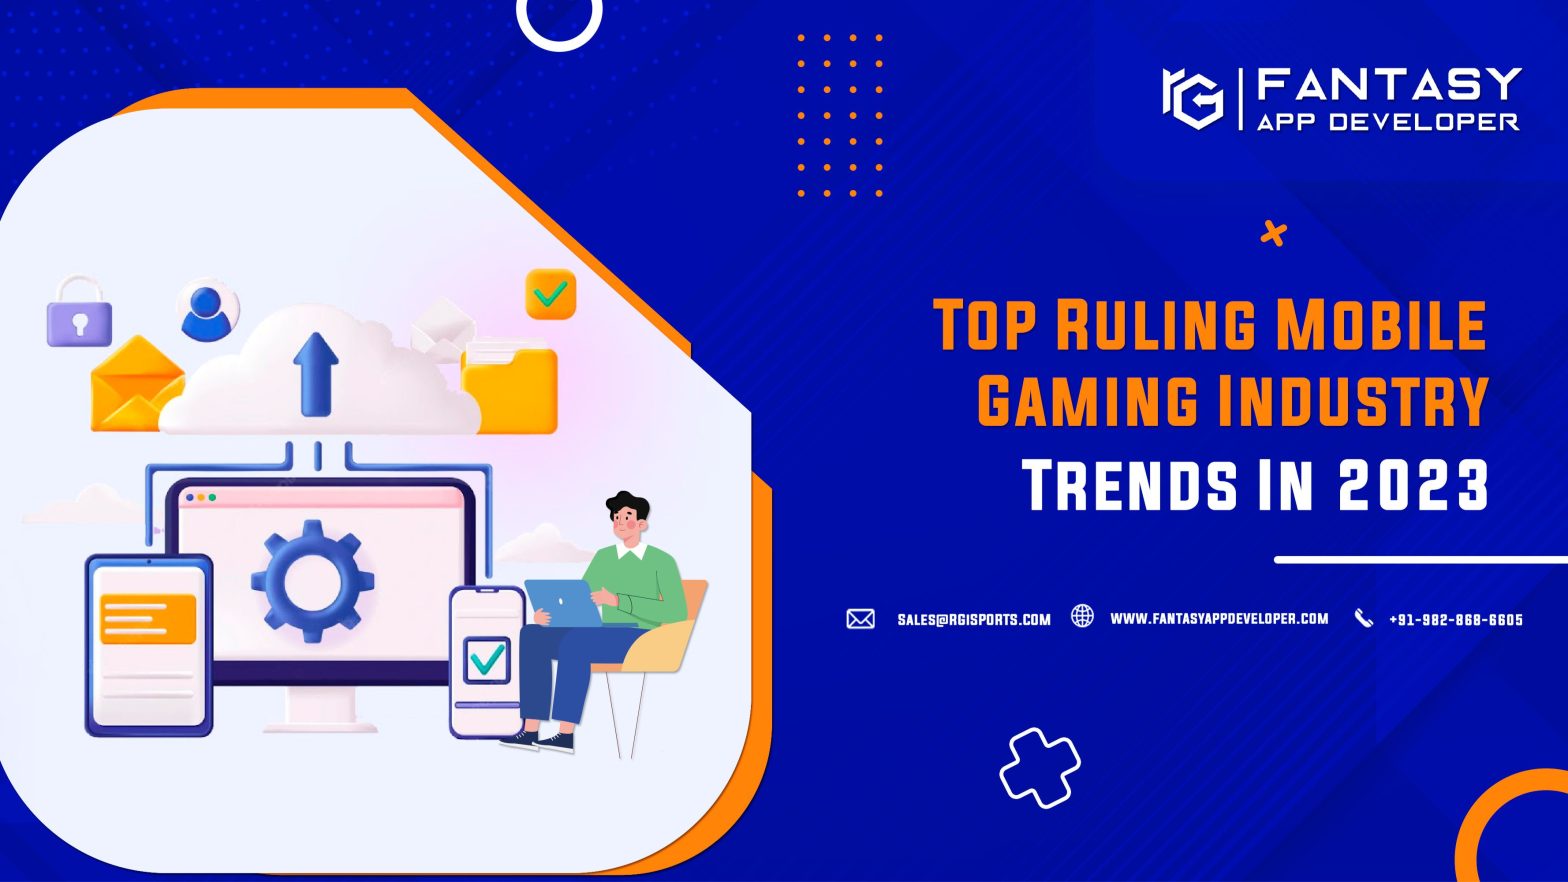 Top Ruling Mobile Gaming Industry Trends In 2023